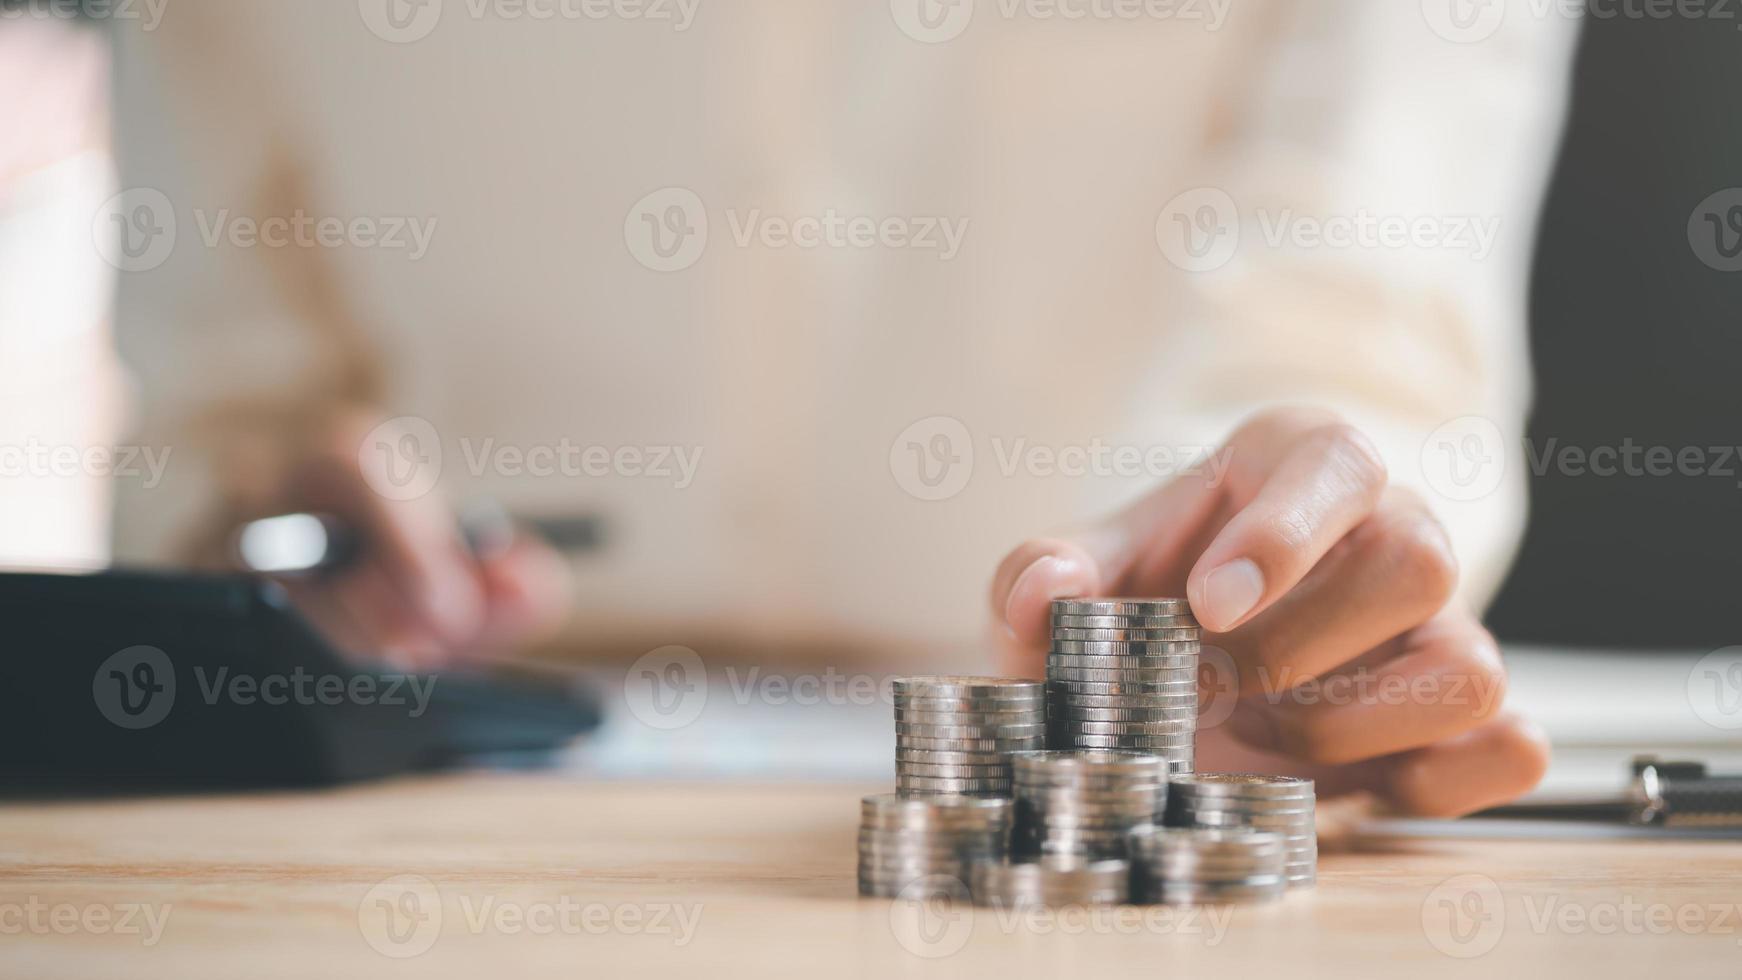 man and pile of coins,investment loan concepts to build residential homes, real estate business, investment savings, mortgages and bank loans, future retirement planning, interest growth,saving money photo